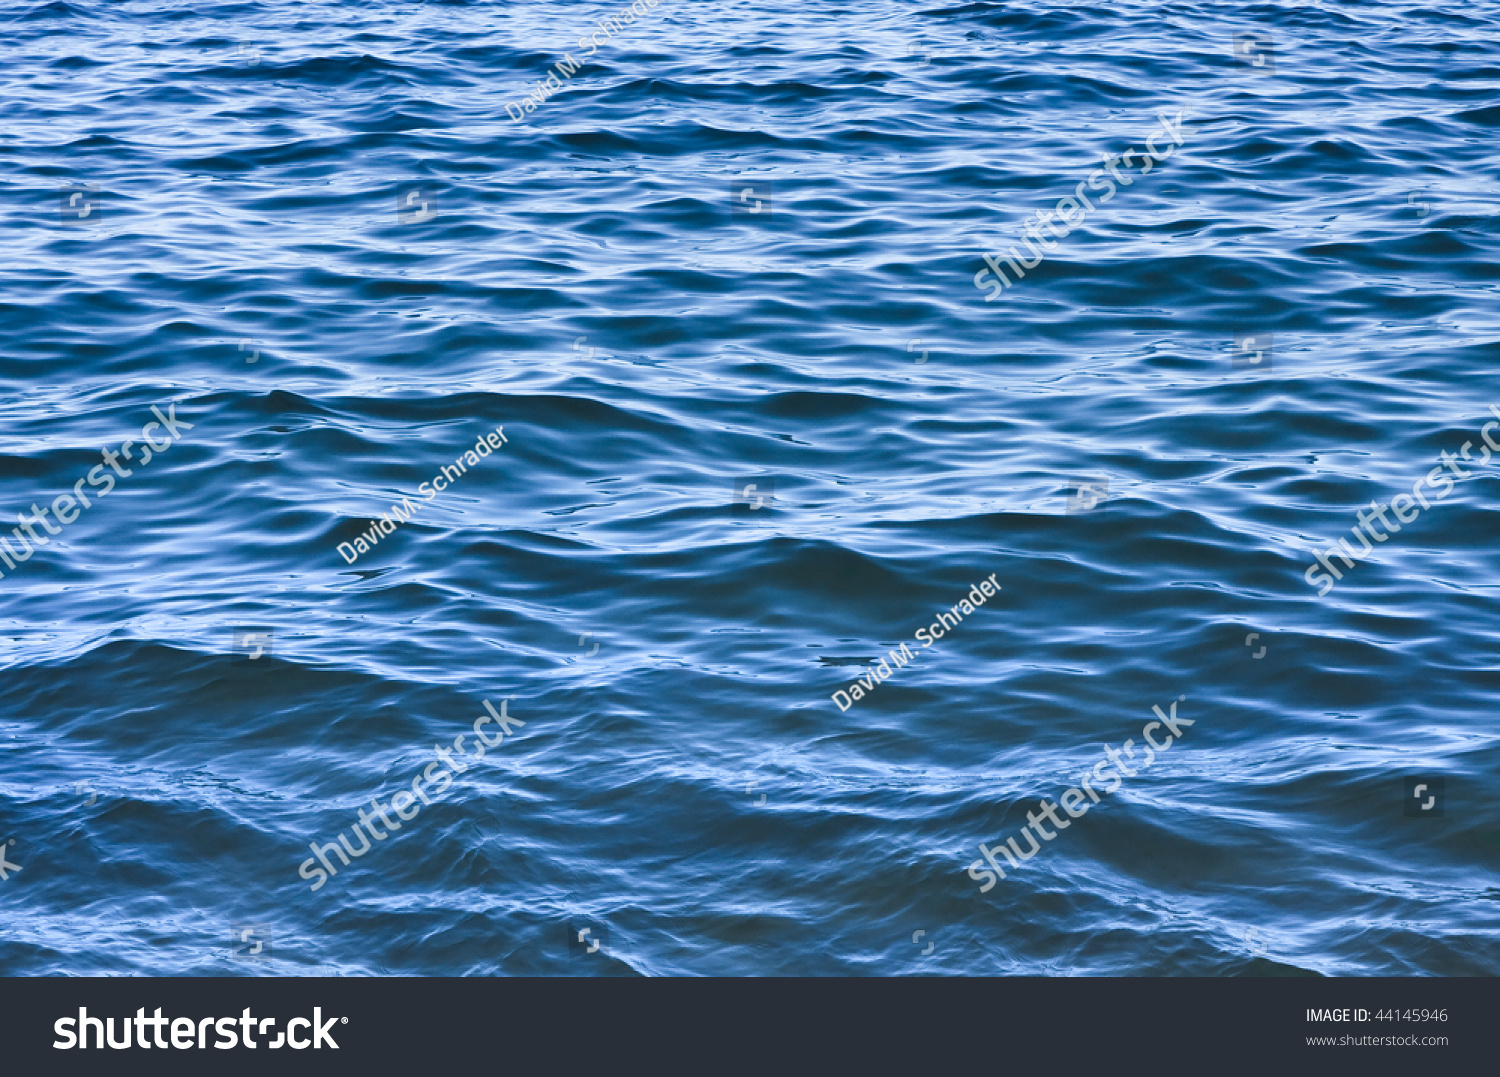 Background Ocean Waves Ripples Off California Stock Photo 44145946